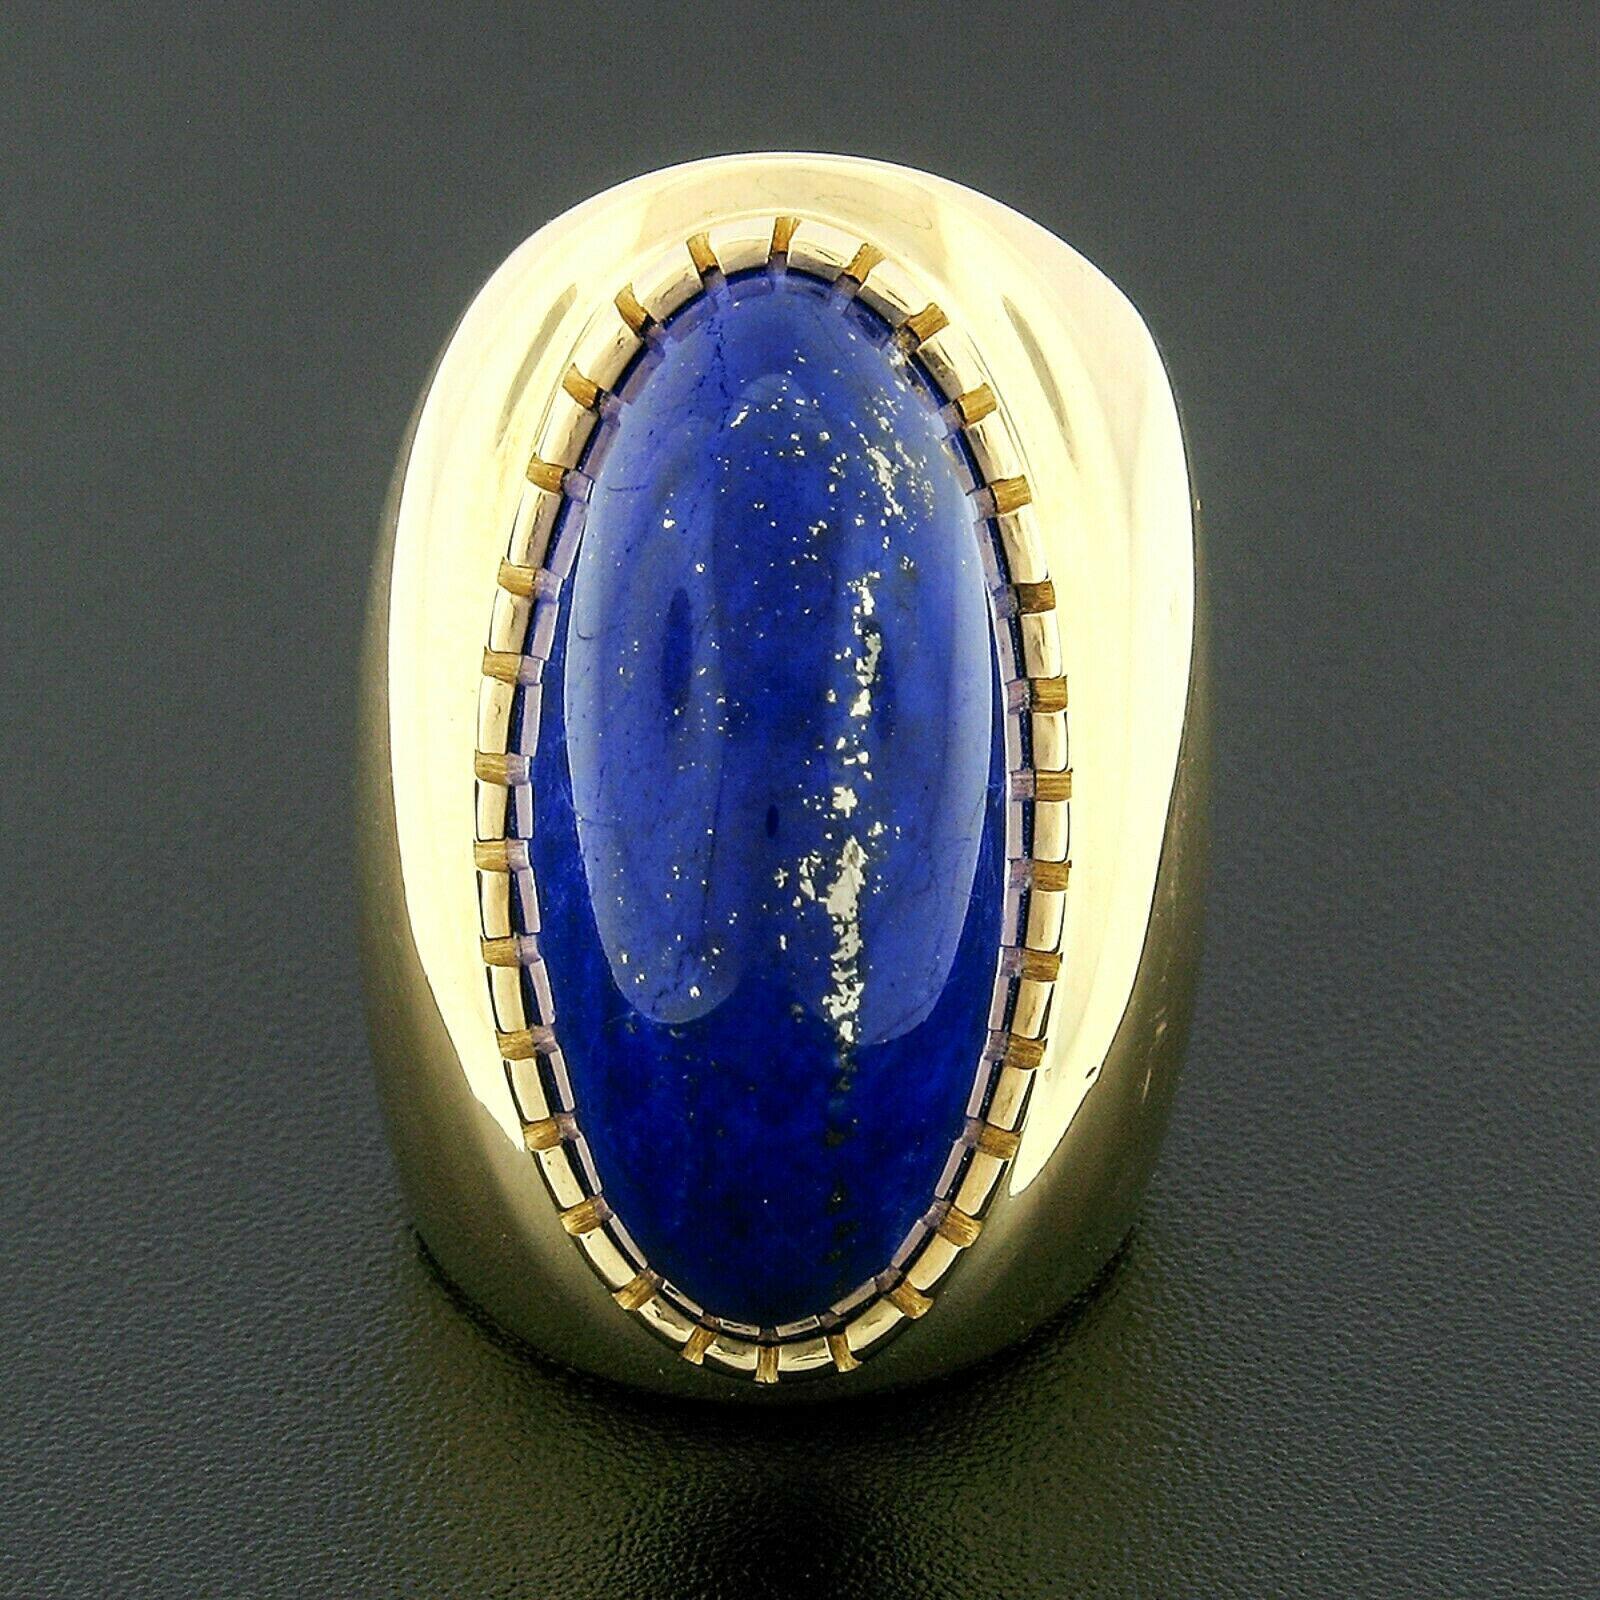 OUT of this WORLD, a bold and large statement cocktail ring crafted in solid 18k yellow gold and set with a truly breathtaking lapis lazuli, certified by GIA which guarantees that it is 100% natural and genuine stone. The stone is a magnificent oval